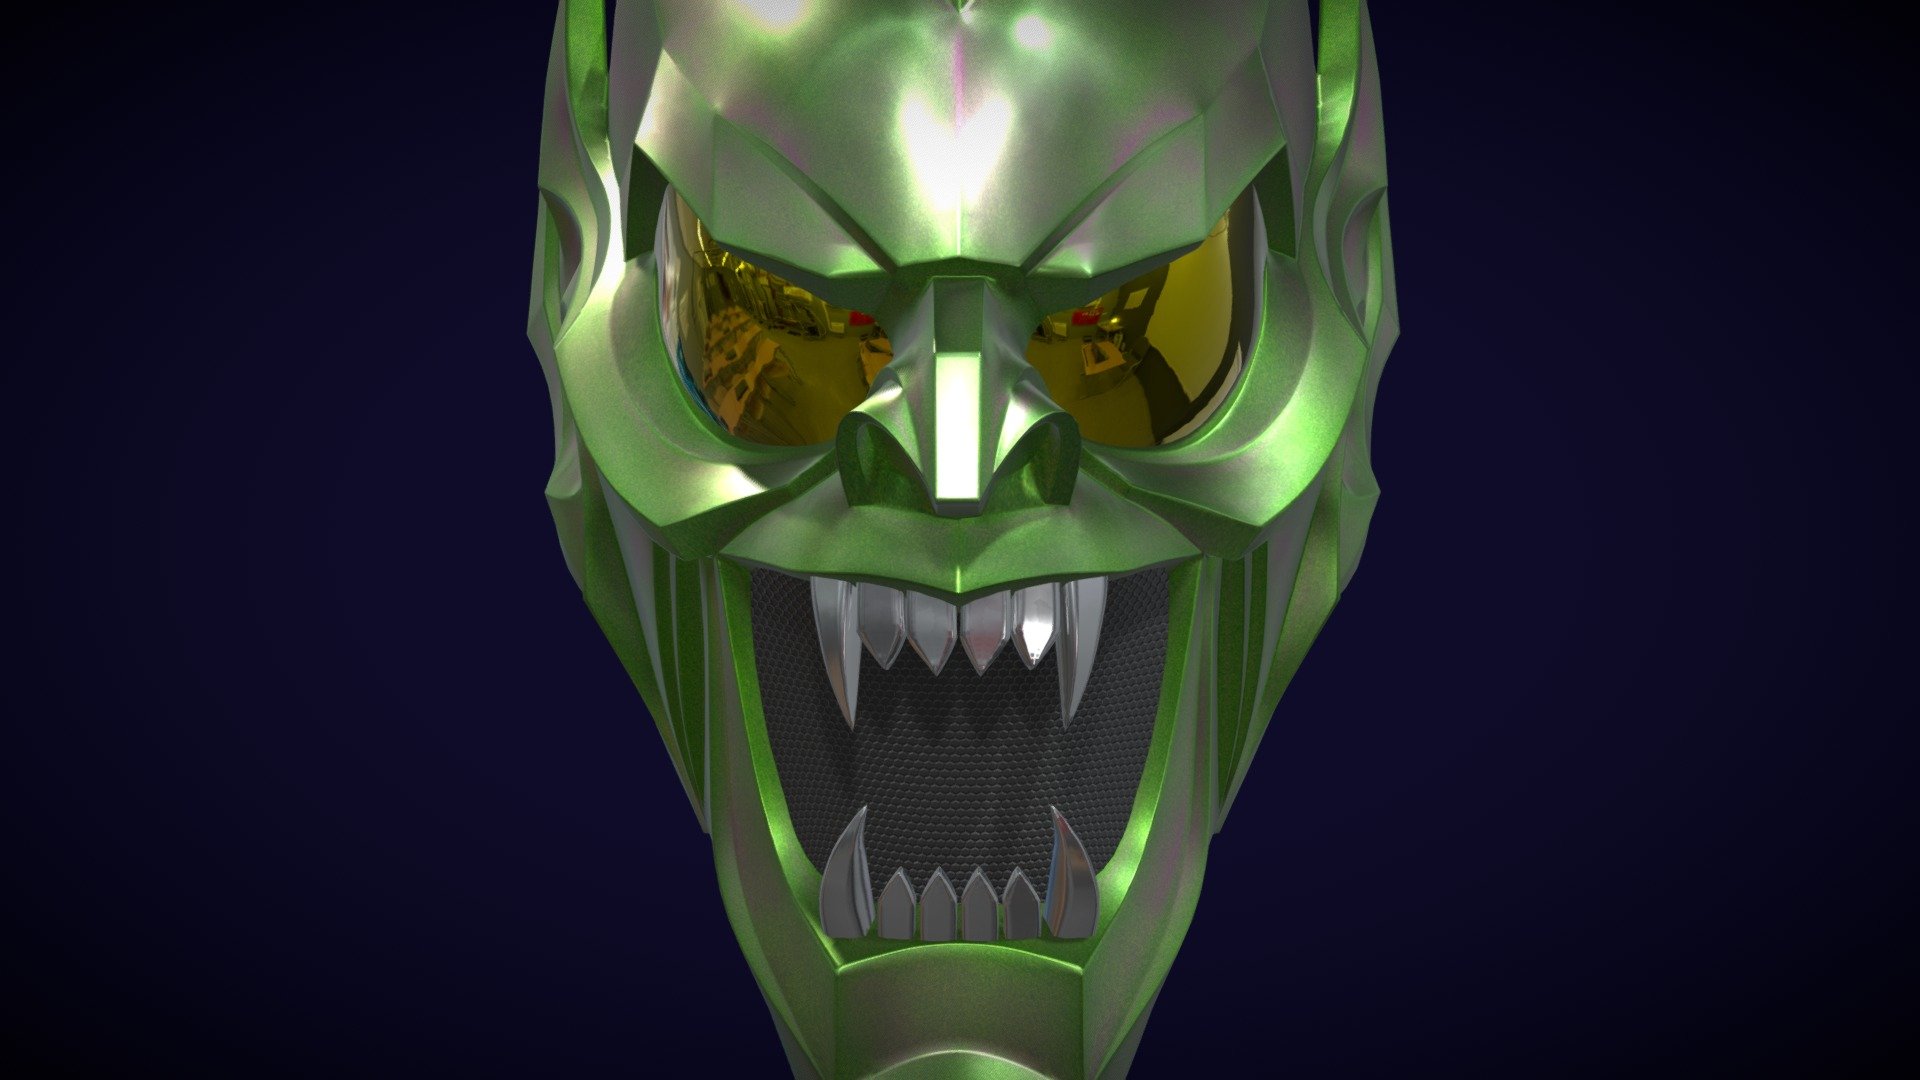 Inspired by the Sam Raimi's Green Goblin helmet used by Willem Dafoe.

Don’t forget to follow me on:

https://www.artstation.com/jliorodrigues

Instagram: jrodrigues_art - Green Goblin helmet (Willem Dafoe) - Buy Royalty Free 3D model by Júlio Rodrigues (@RodriguesJulio) 3d model